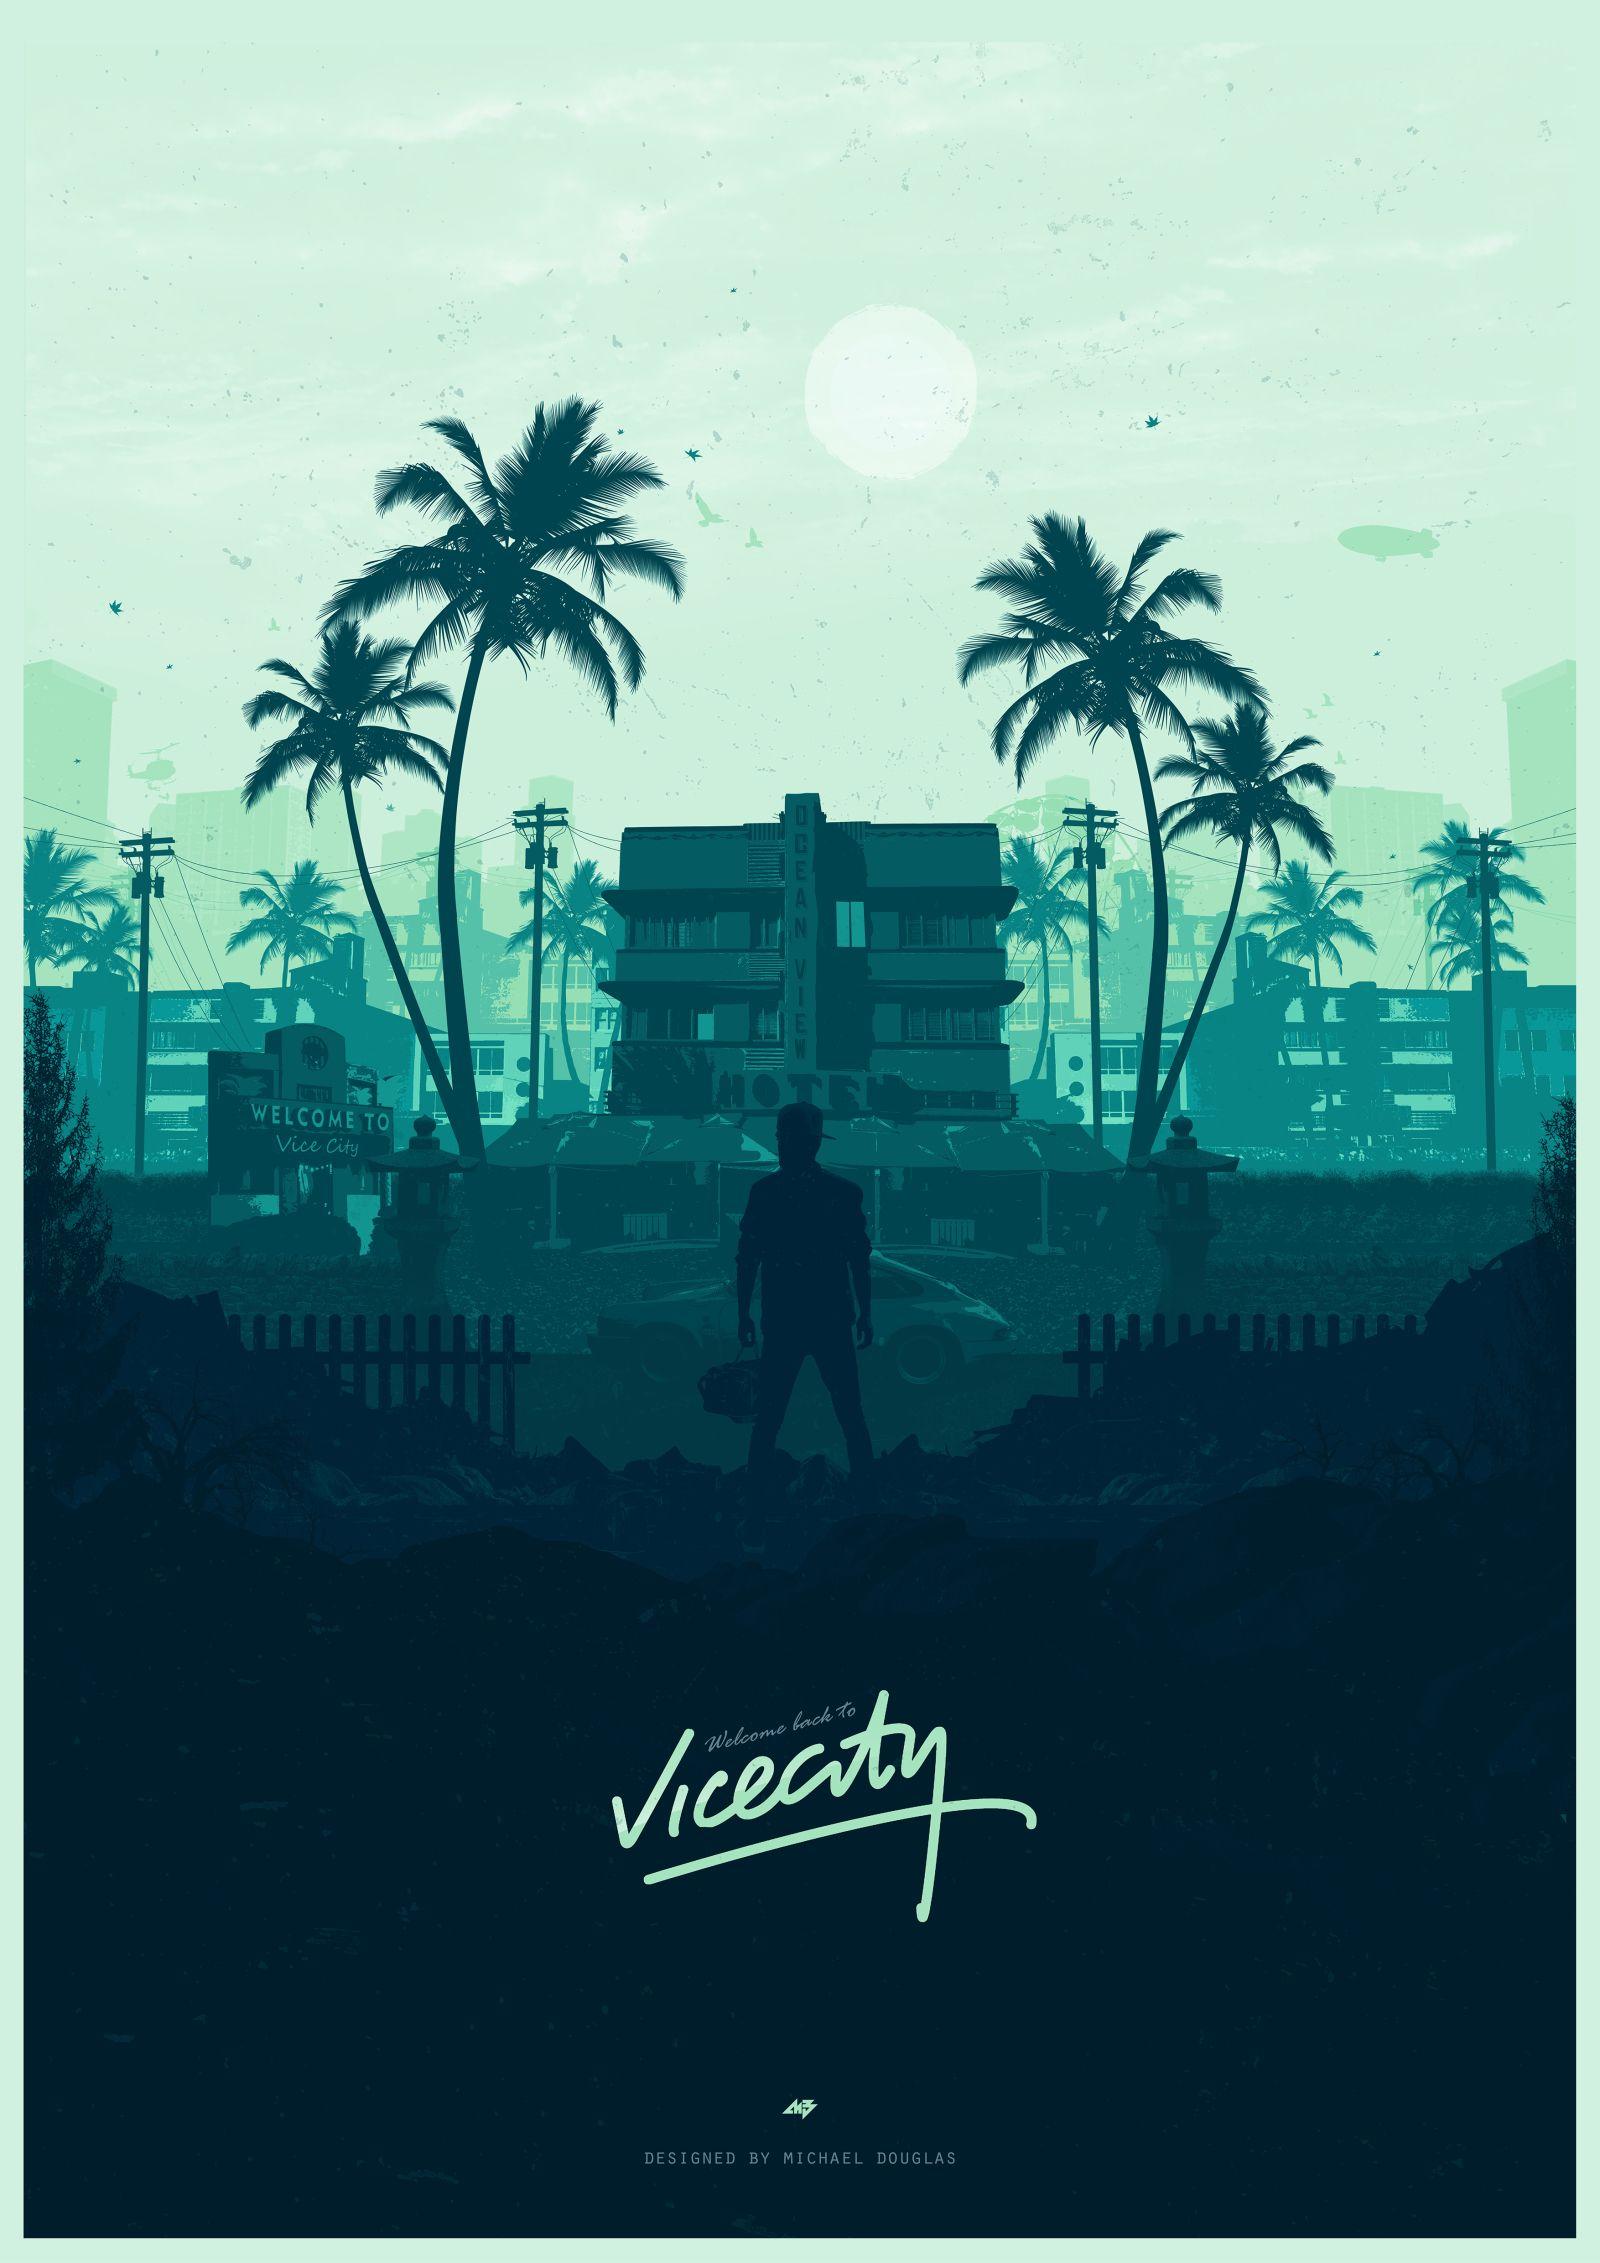 Welcome back to Vice City. Posters. Video game posters